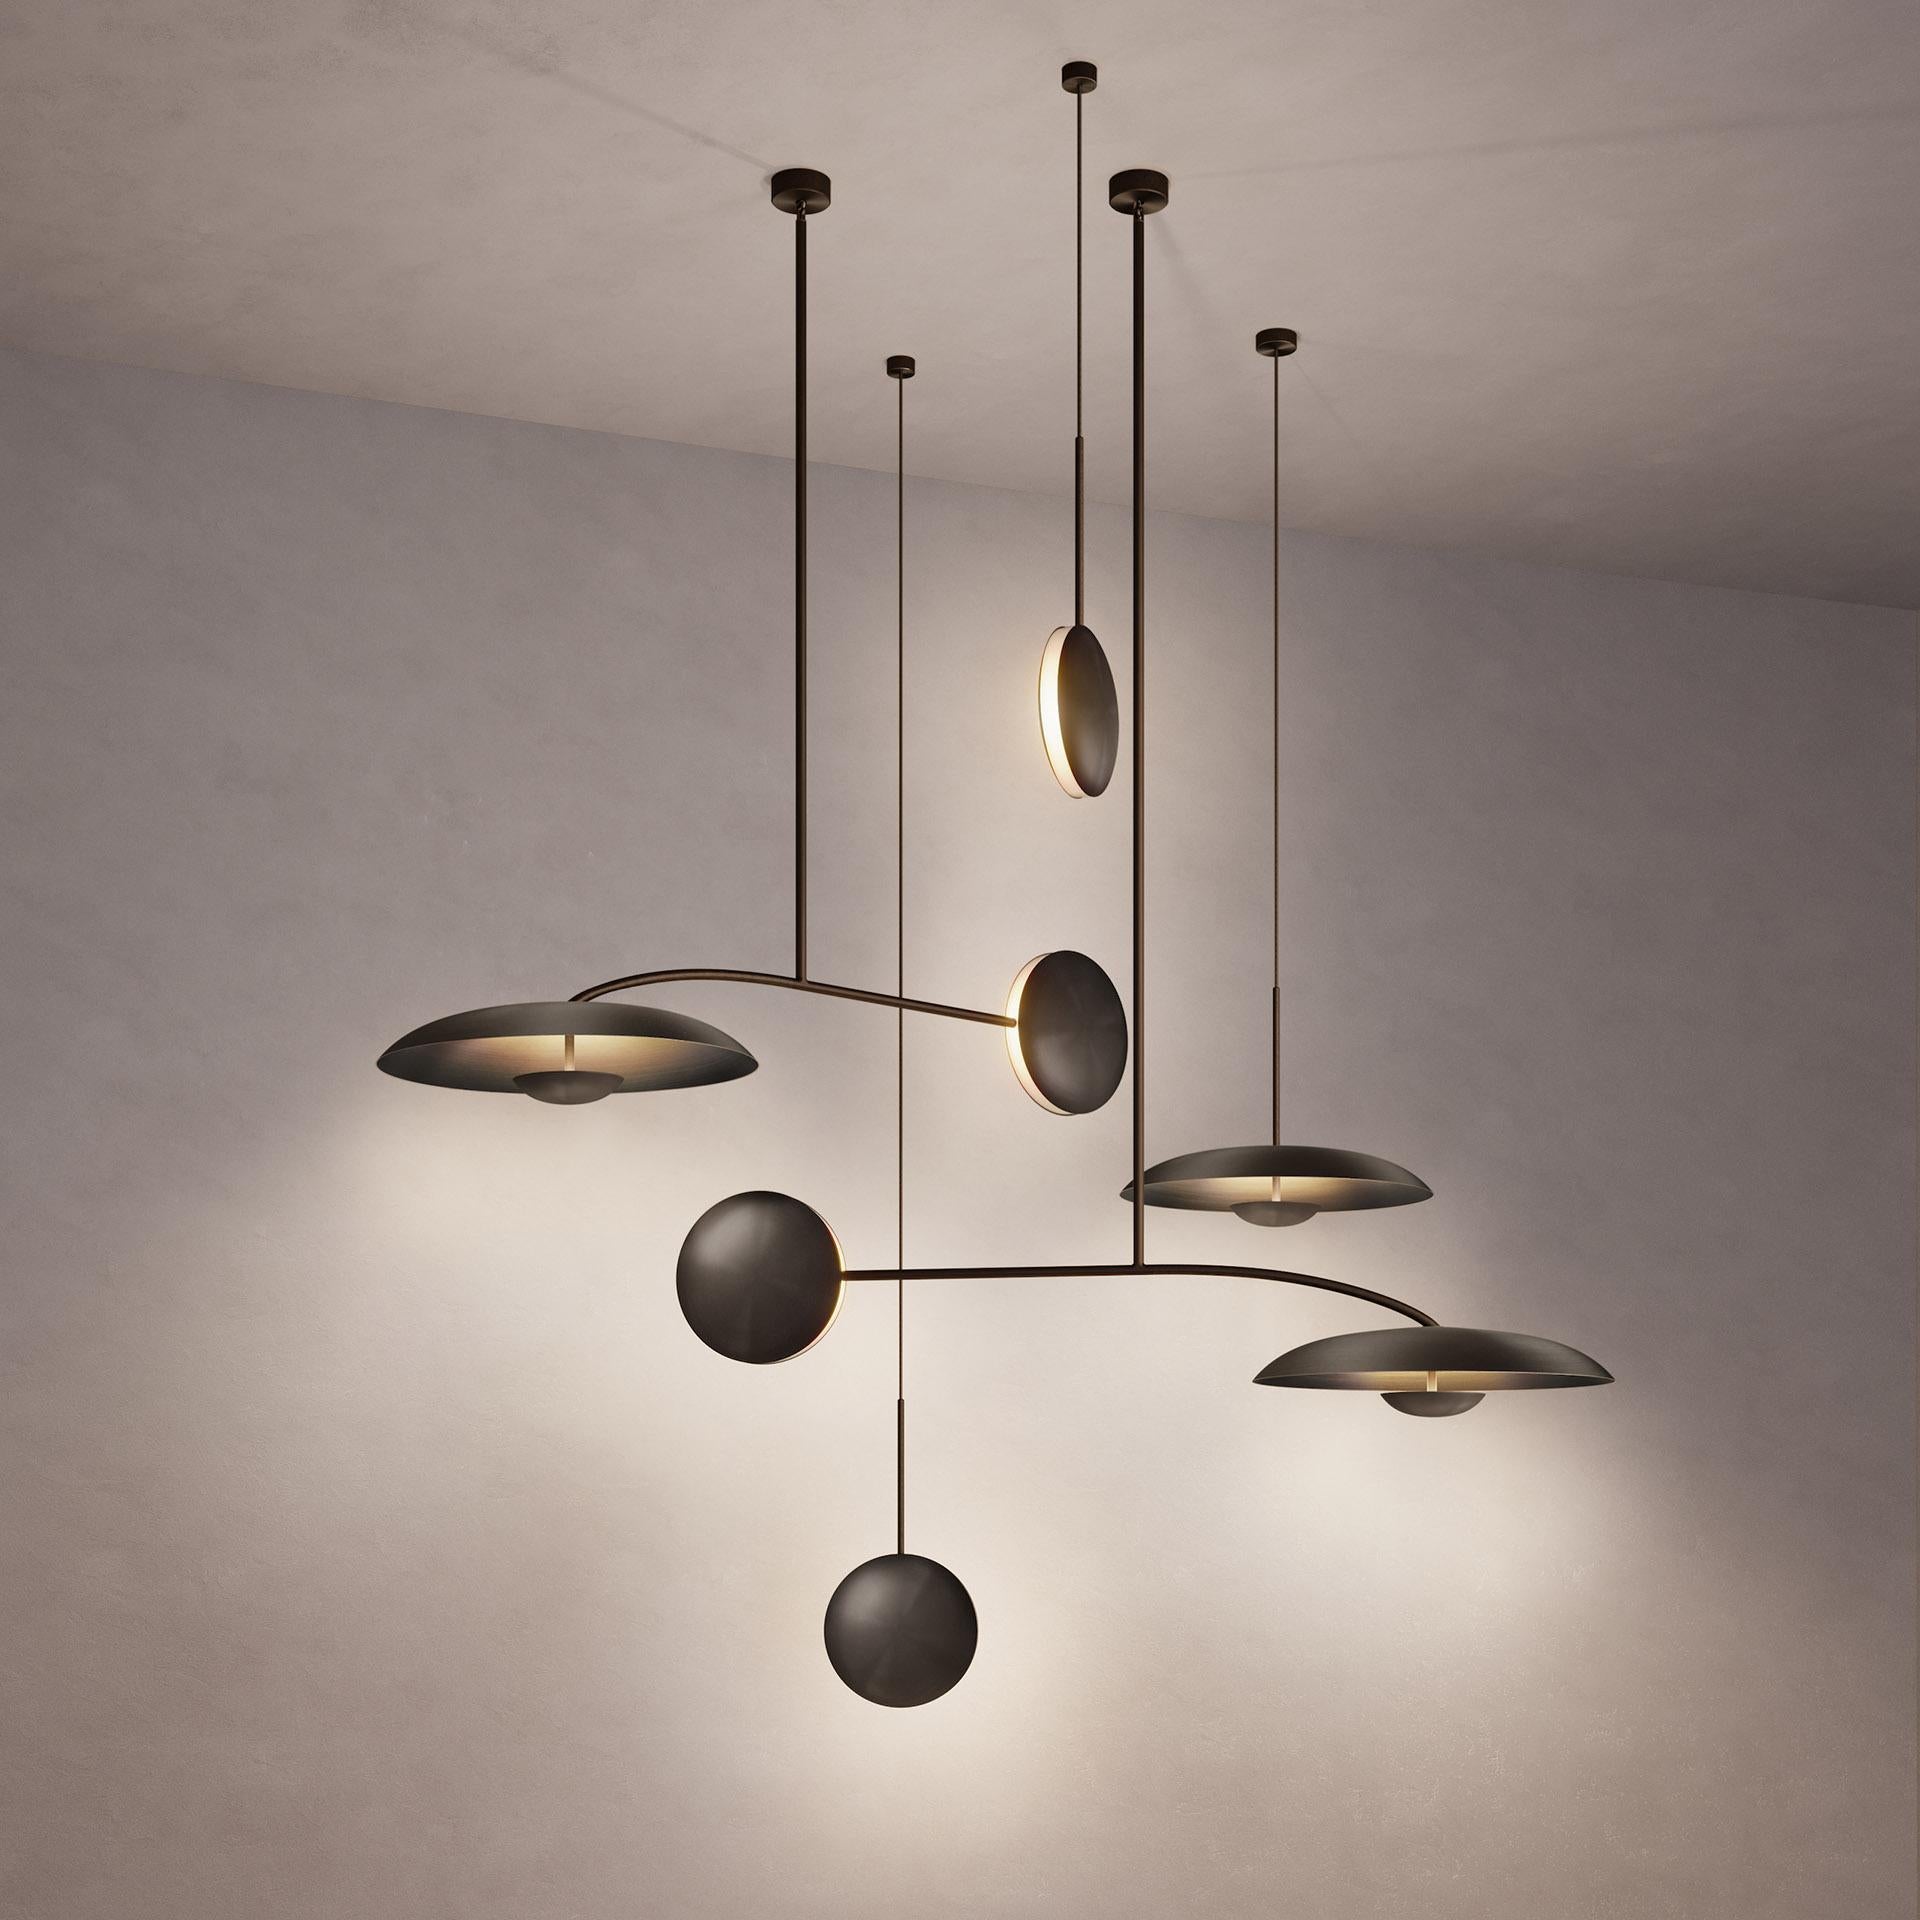 Inspired by planet-like shapes and textures, the Cosmic collection plays with both metal properties and a selection of patina finishes.
 
Named after the natural dark rock material Regolith, the five lighting components are harmoniously balanced